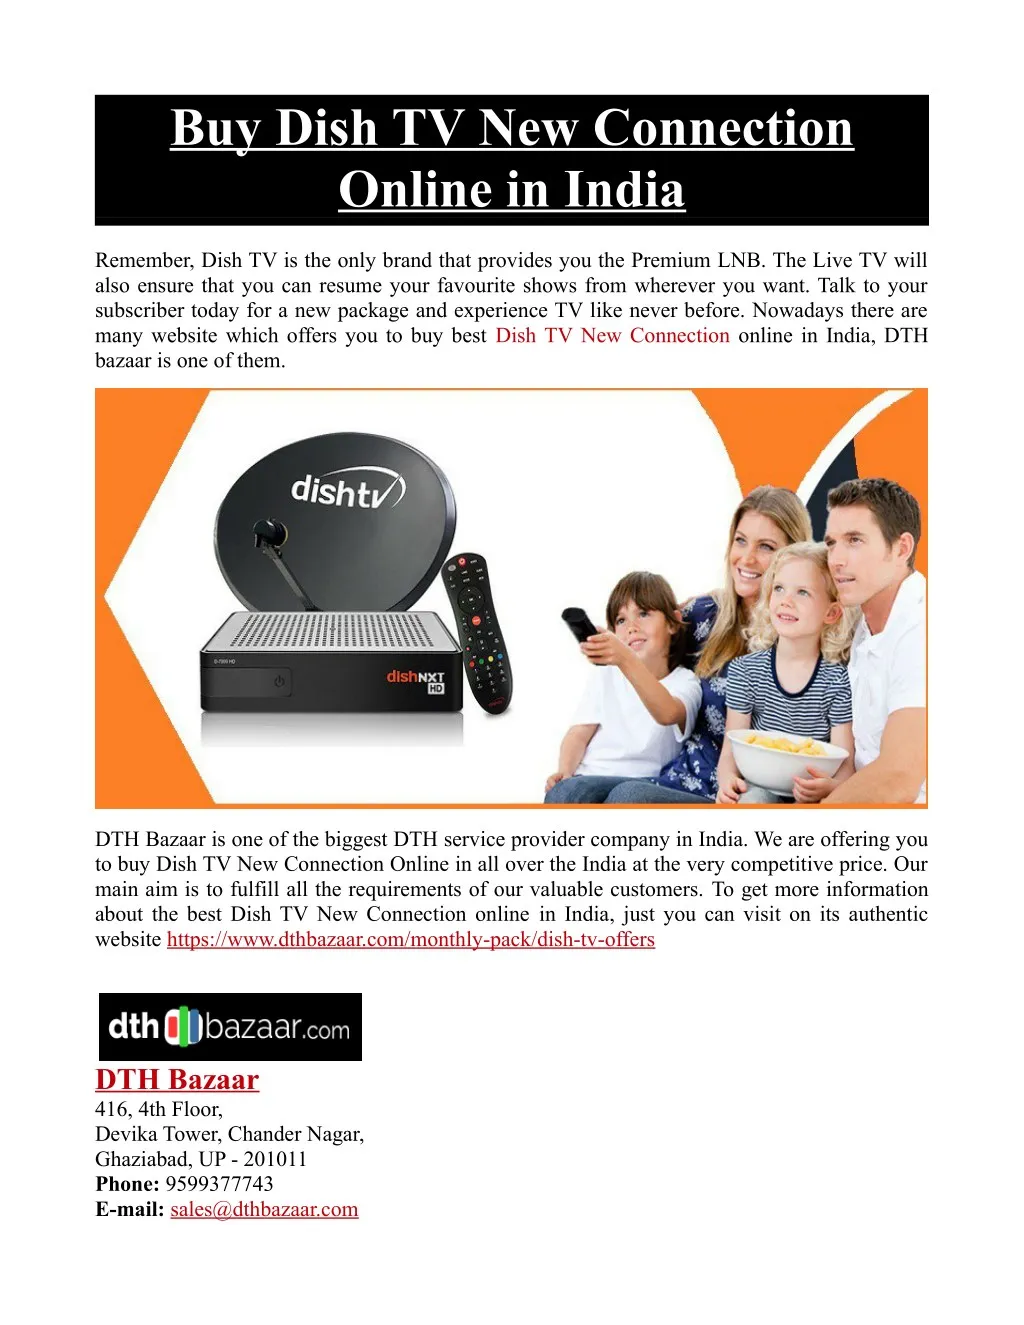 buy dish tv new connection online in india